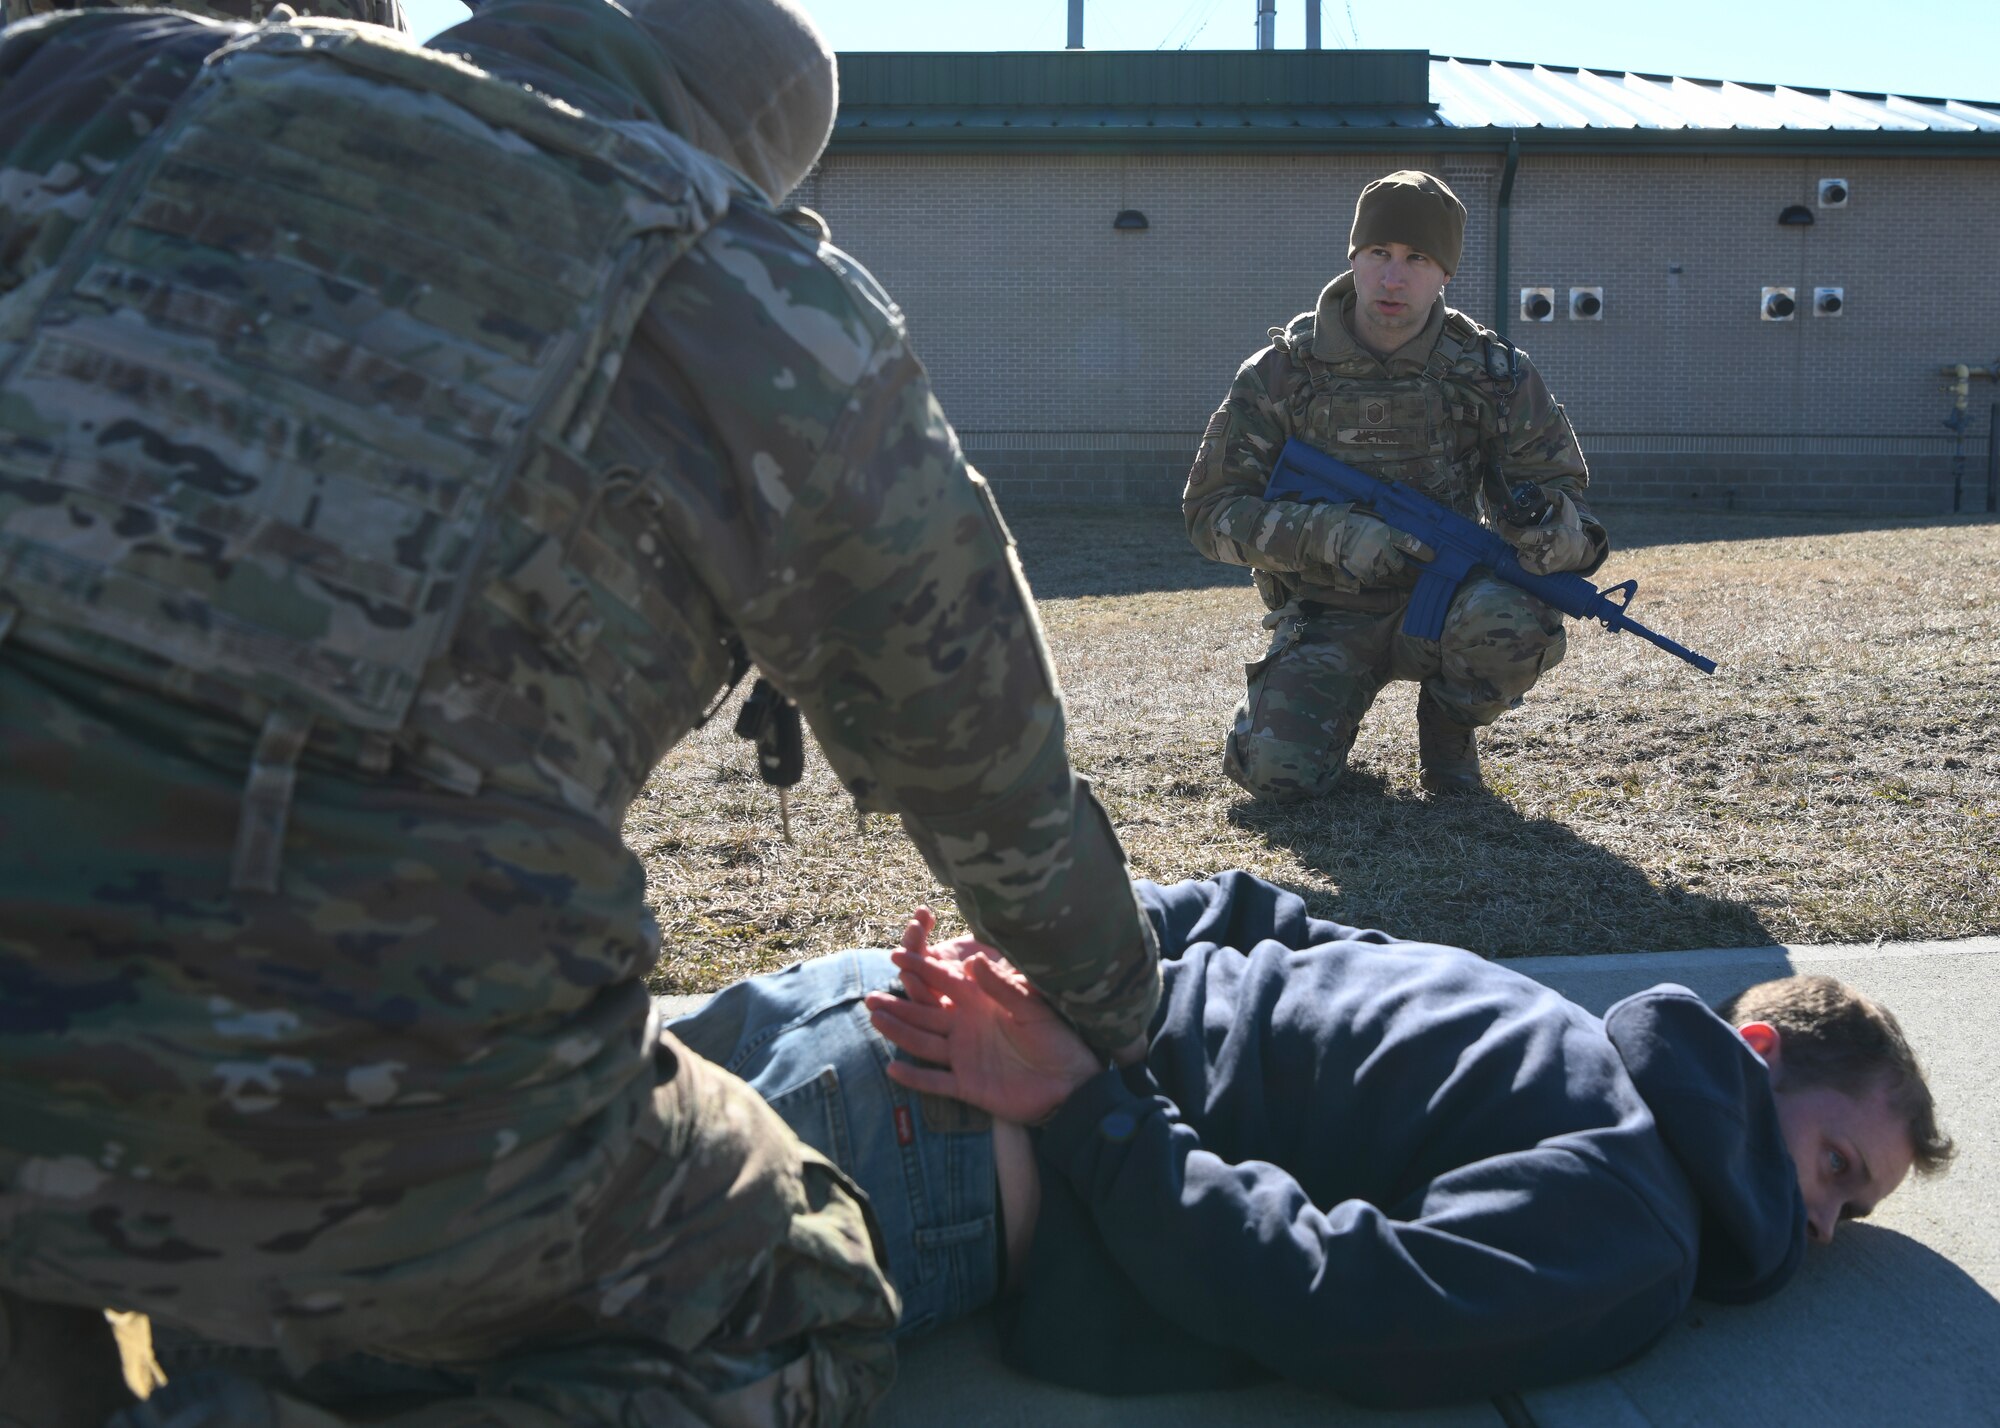 Members of the 106th Security Forces Squadron participate in an installation breach training exercise at NY Air National Guard’s 106th Rescue Wing, Francis S. Gabreski Air National Guard Base, Westhampton Beach, N.Y., March 4, 2022. During the training, the suspect being detained failed to stop at the base entrance and was subsequently arrested by 106th Security Forces. (U.S. Air National Guard photo by Staff Sgt. Daniel H. Farrell)